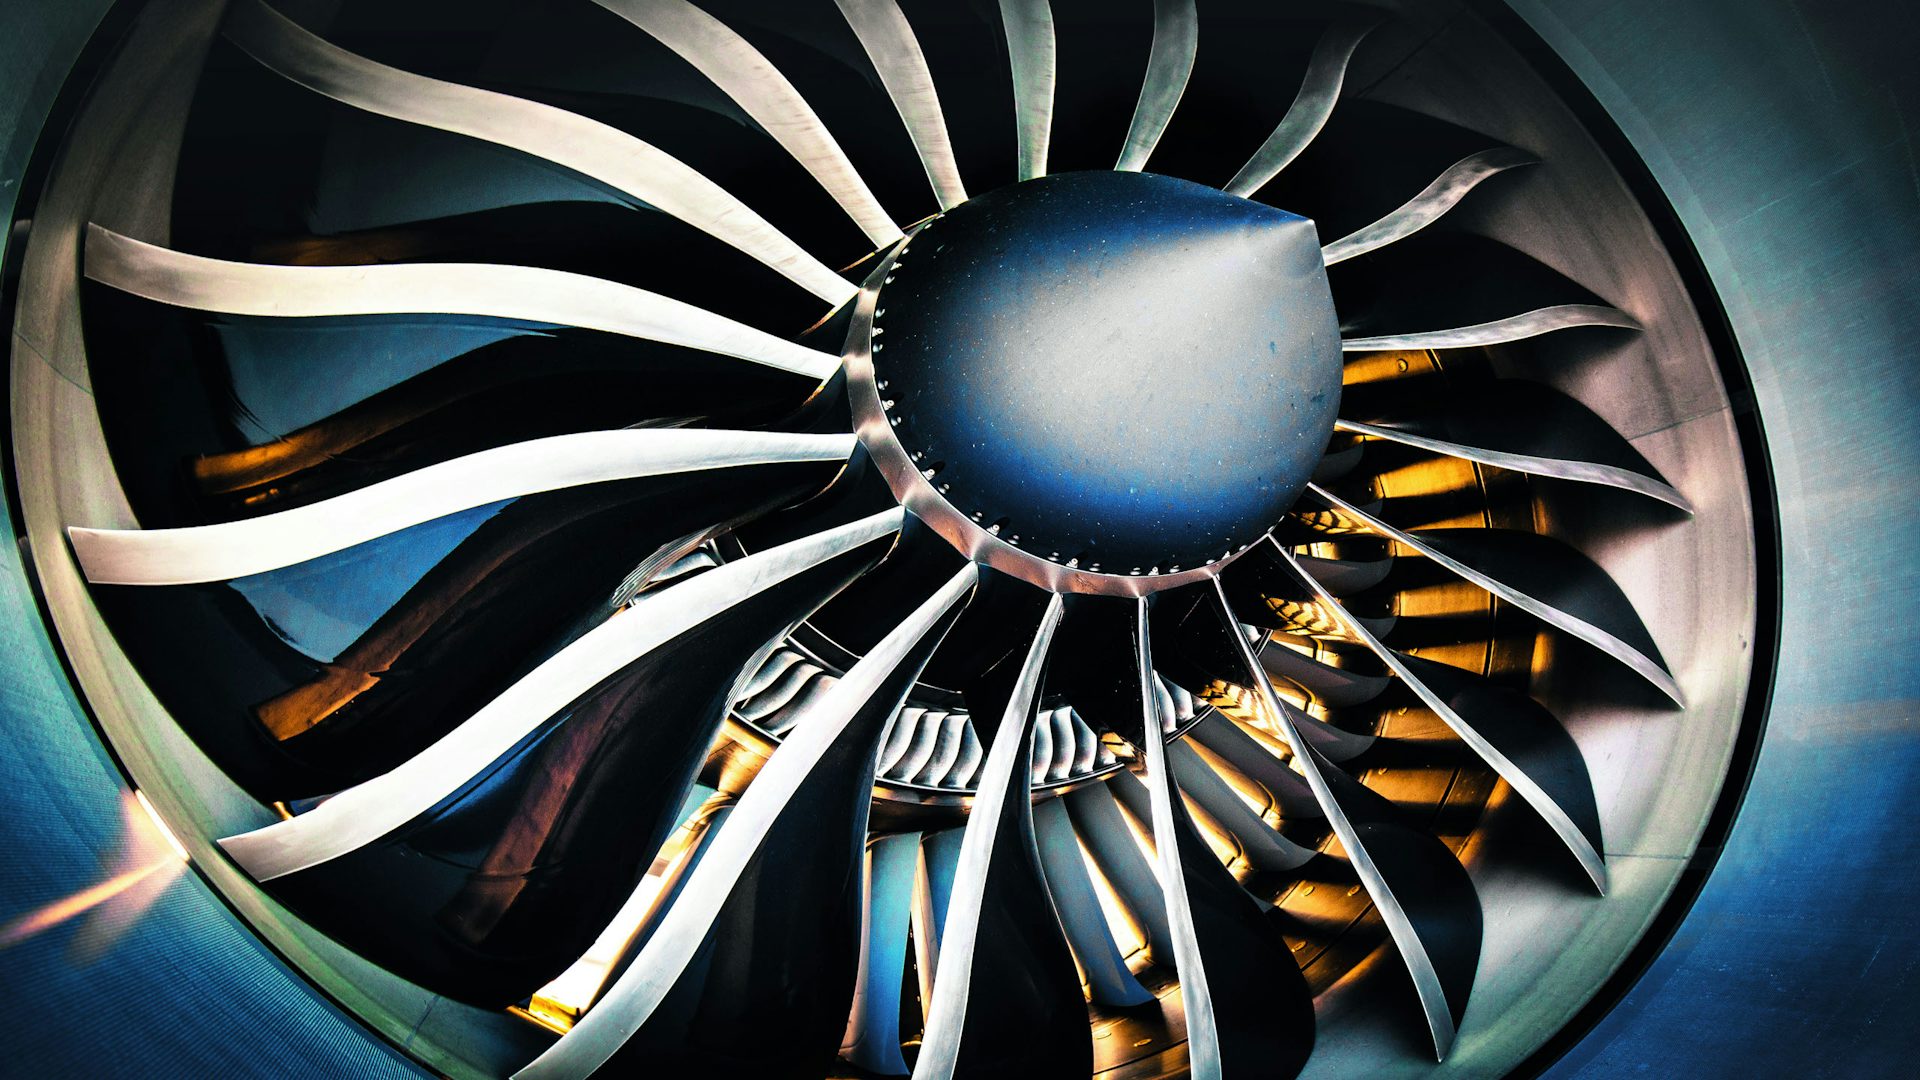 The front view of a jet engine